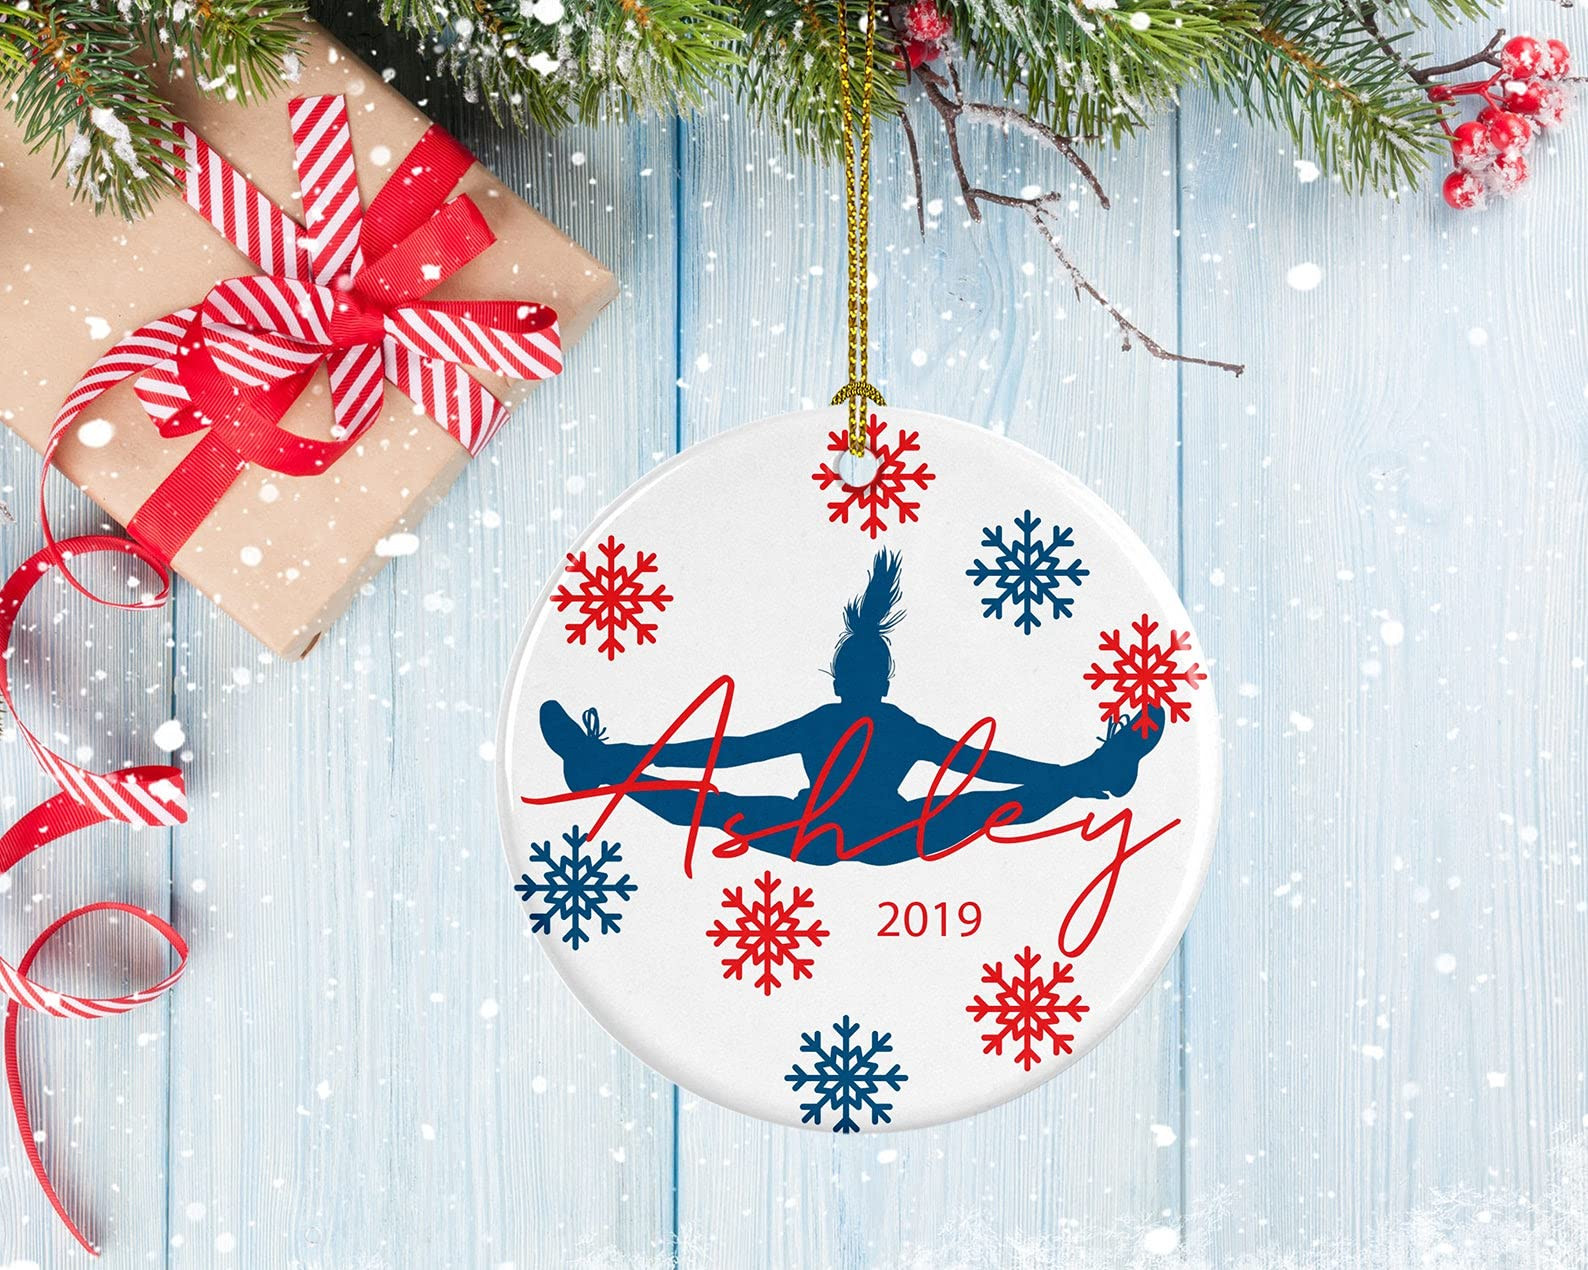 Personalized Cheerleader Ornament Porcelain Ornament Toe Touch Design Gifts For Cheerleaders Christmas Ornament Hanging Decoration Christmas Tree Ornament